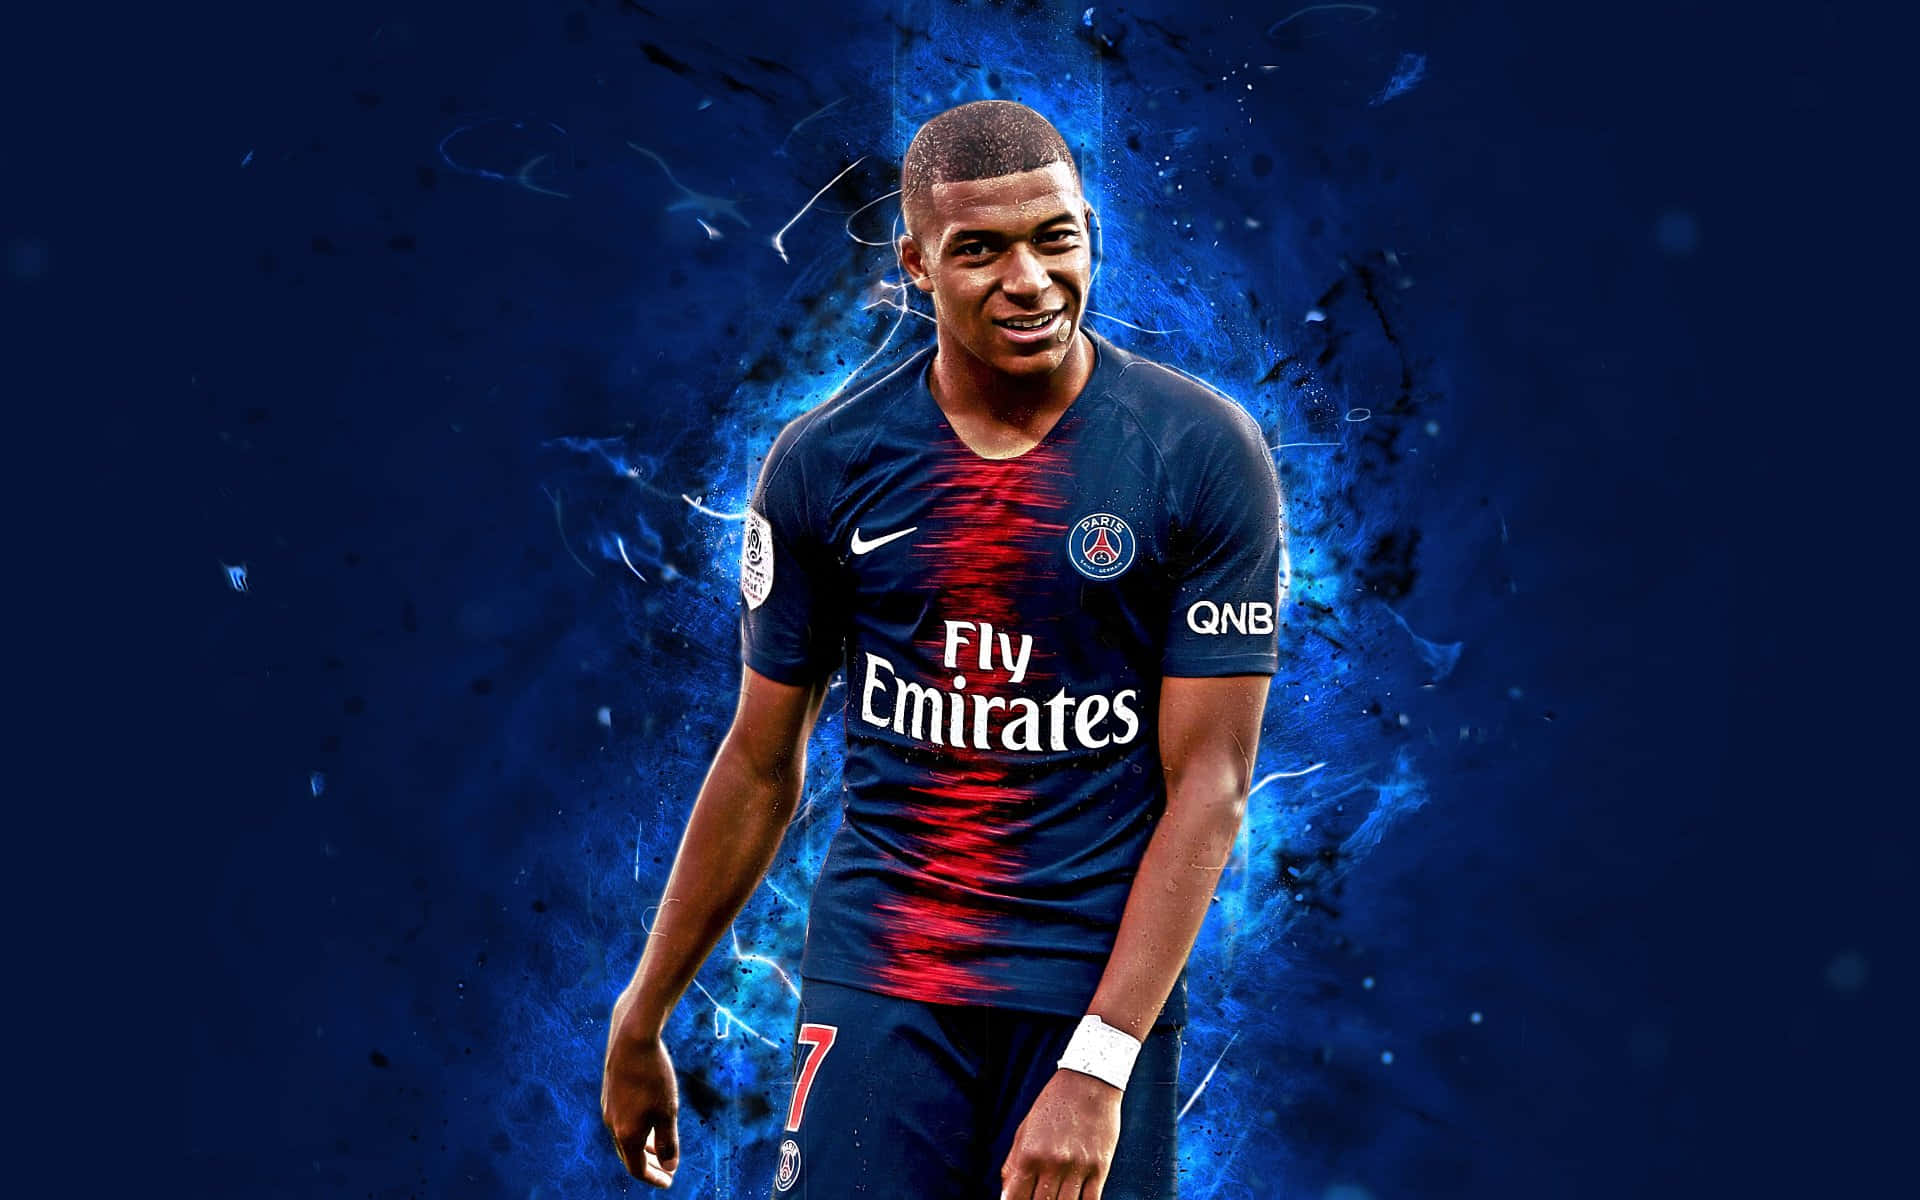 French professional footballer, Kylian Mbappe